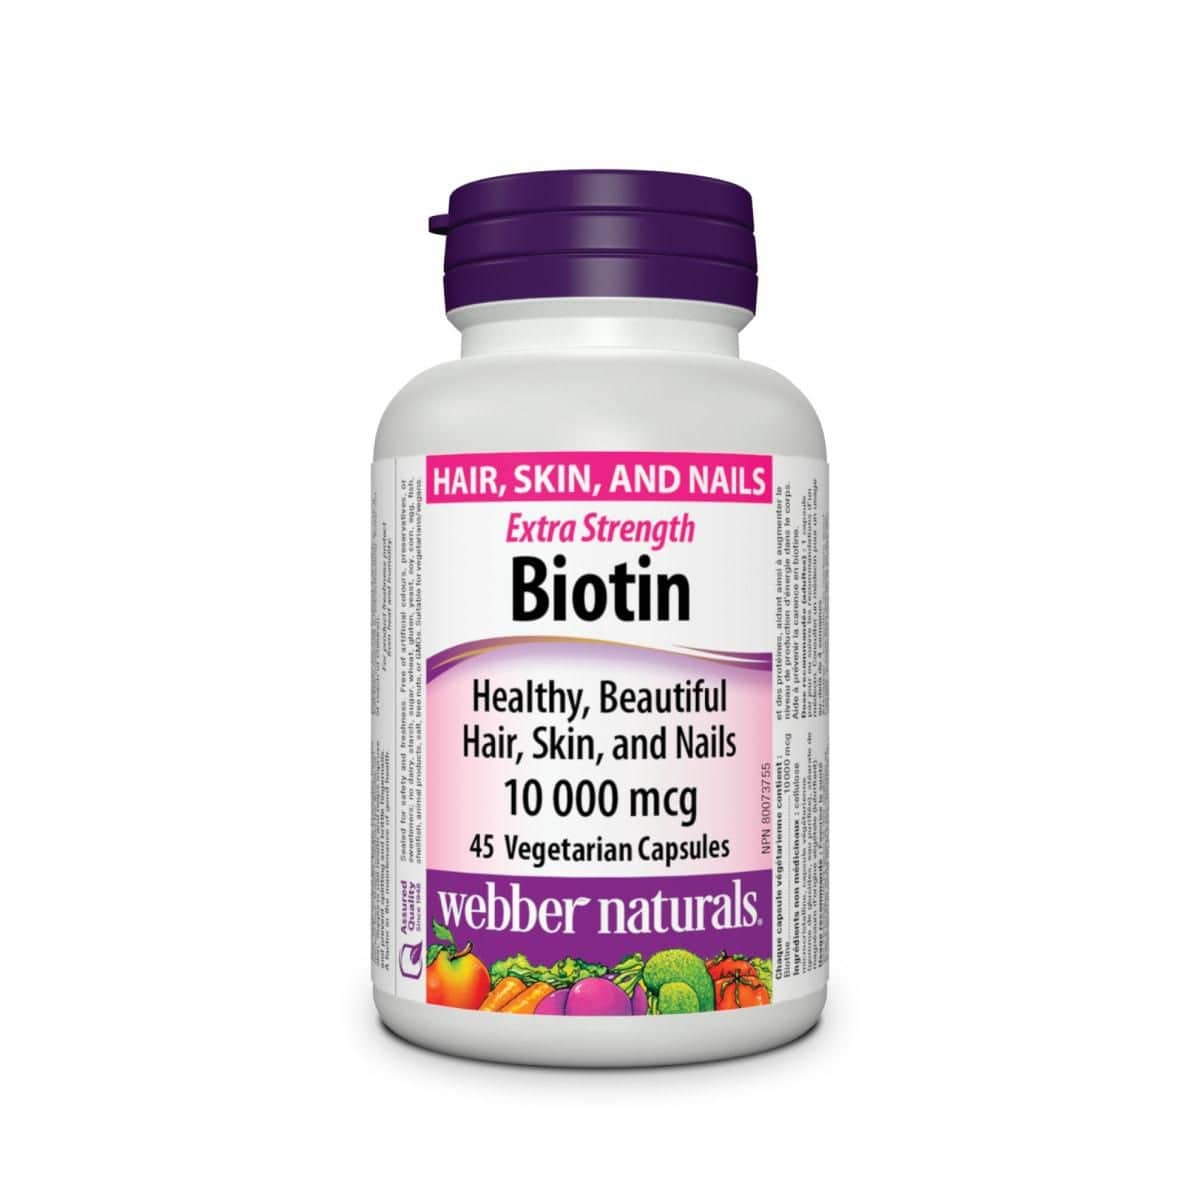 Product label for webber naturals Biotin Extra Strength 10000 mcg (45 capsules) in English